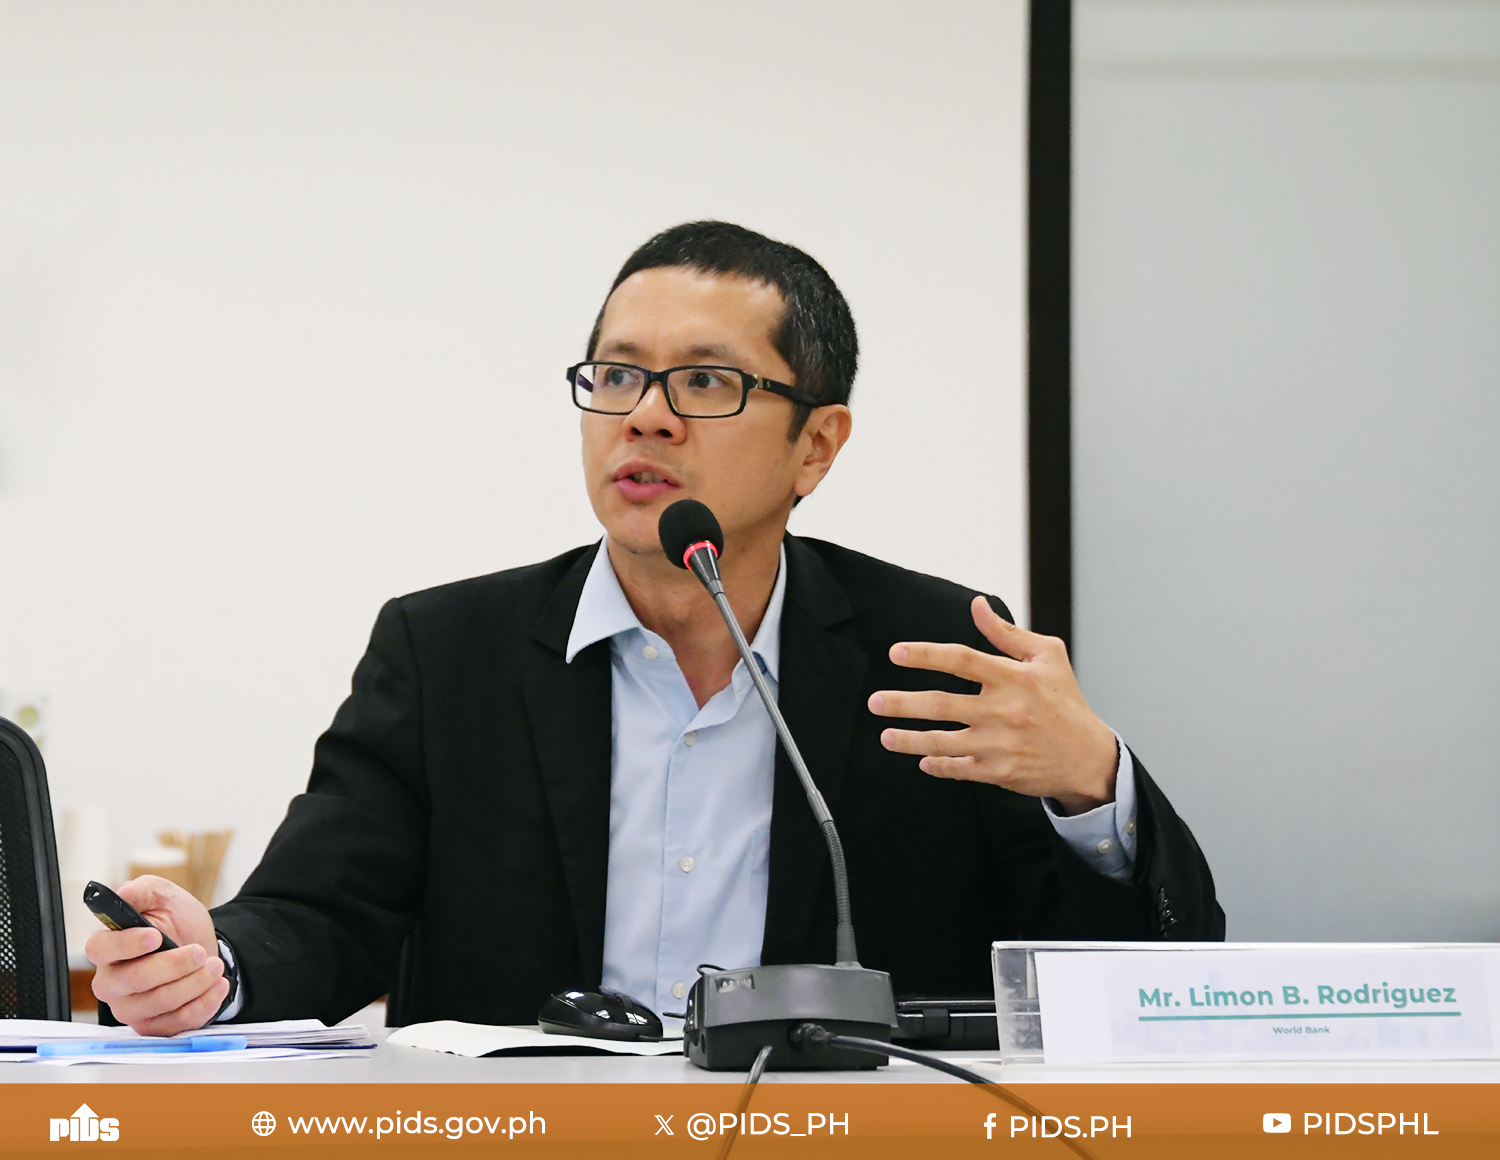 PIDS hosted a knowledge-sharing session with the World Bank-4.png